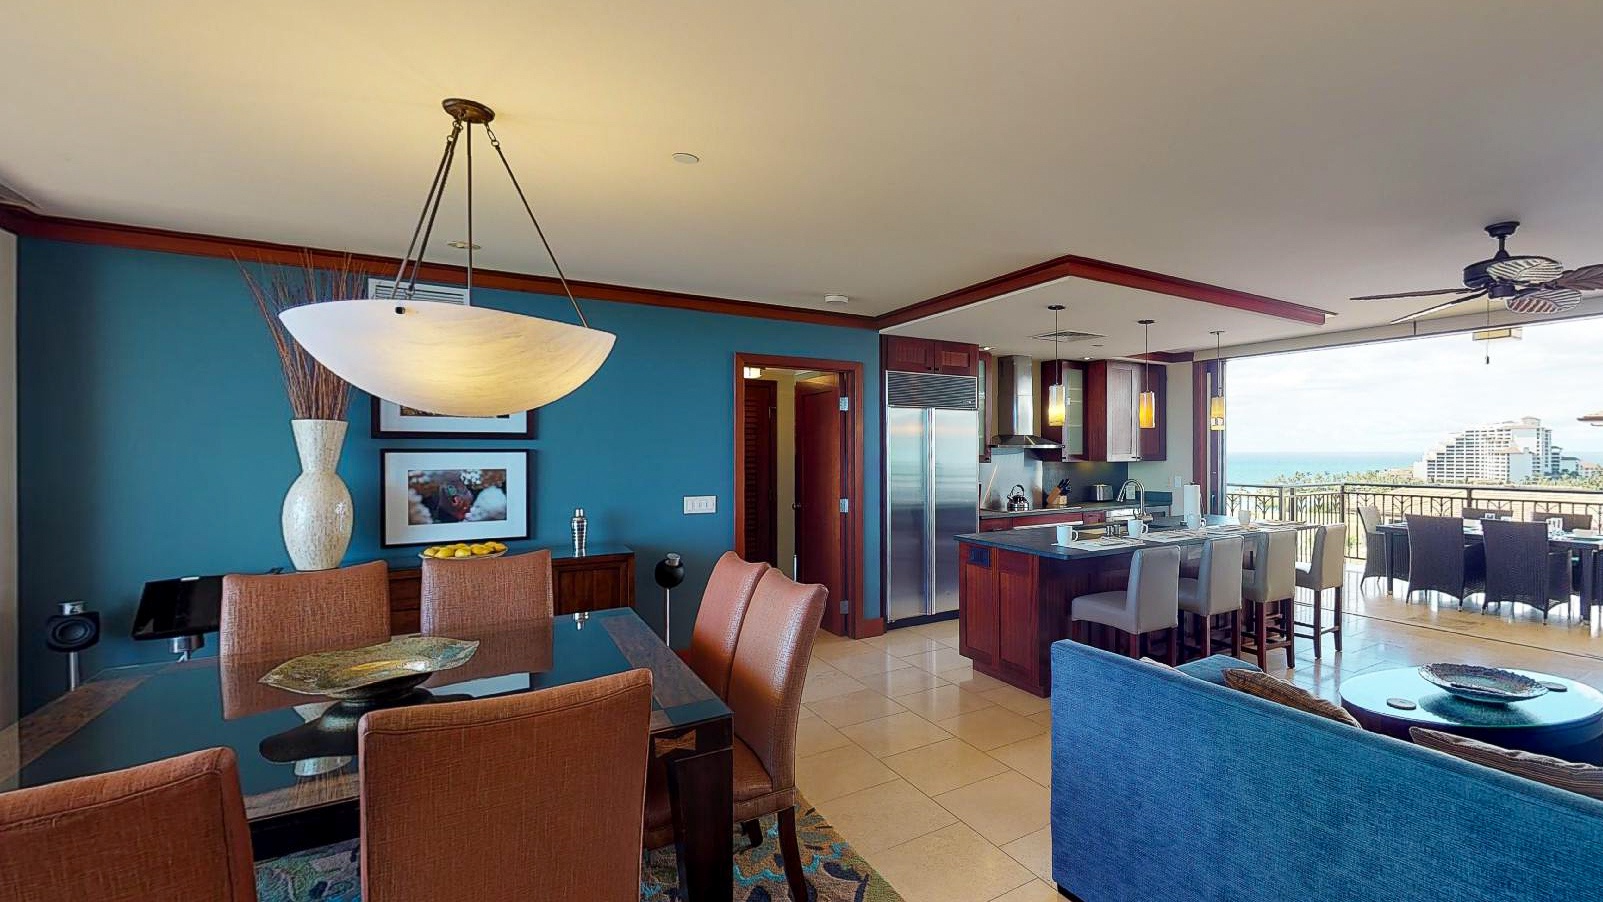 Kapolei Vacation Rentals, Ko Olina Beach Villas O1121 - An open floor plan, dining area and seating for 8.